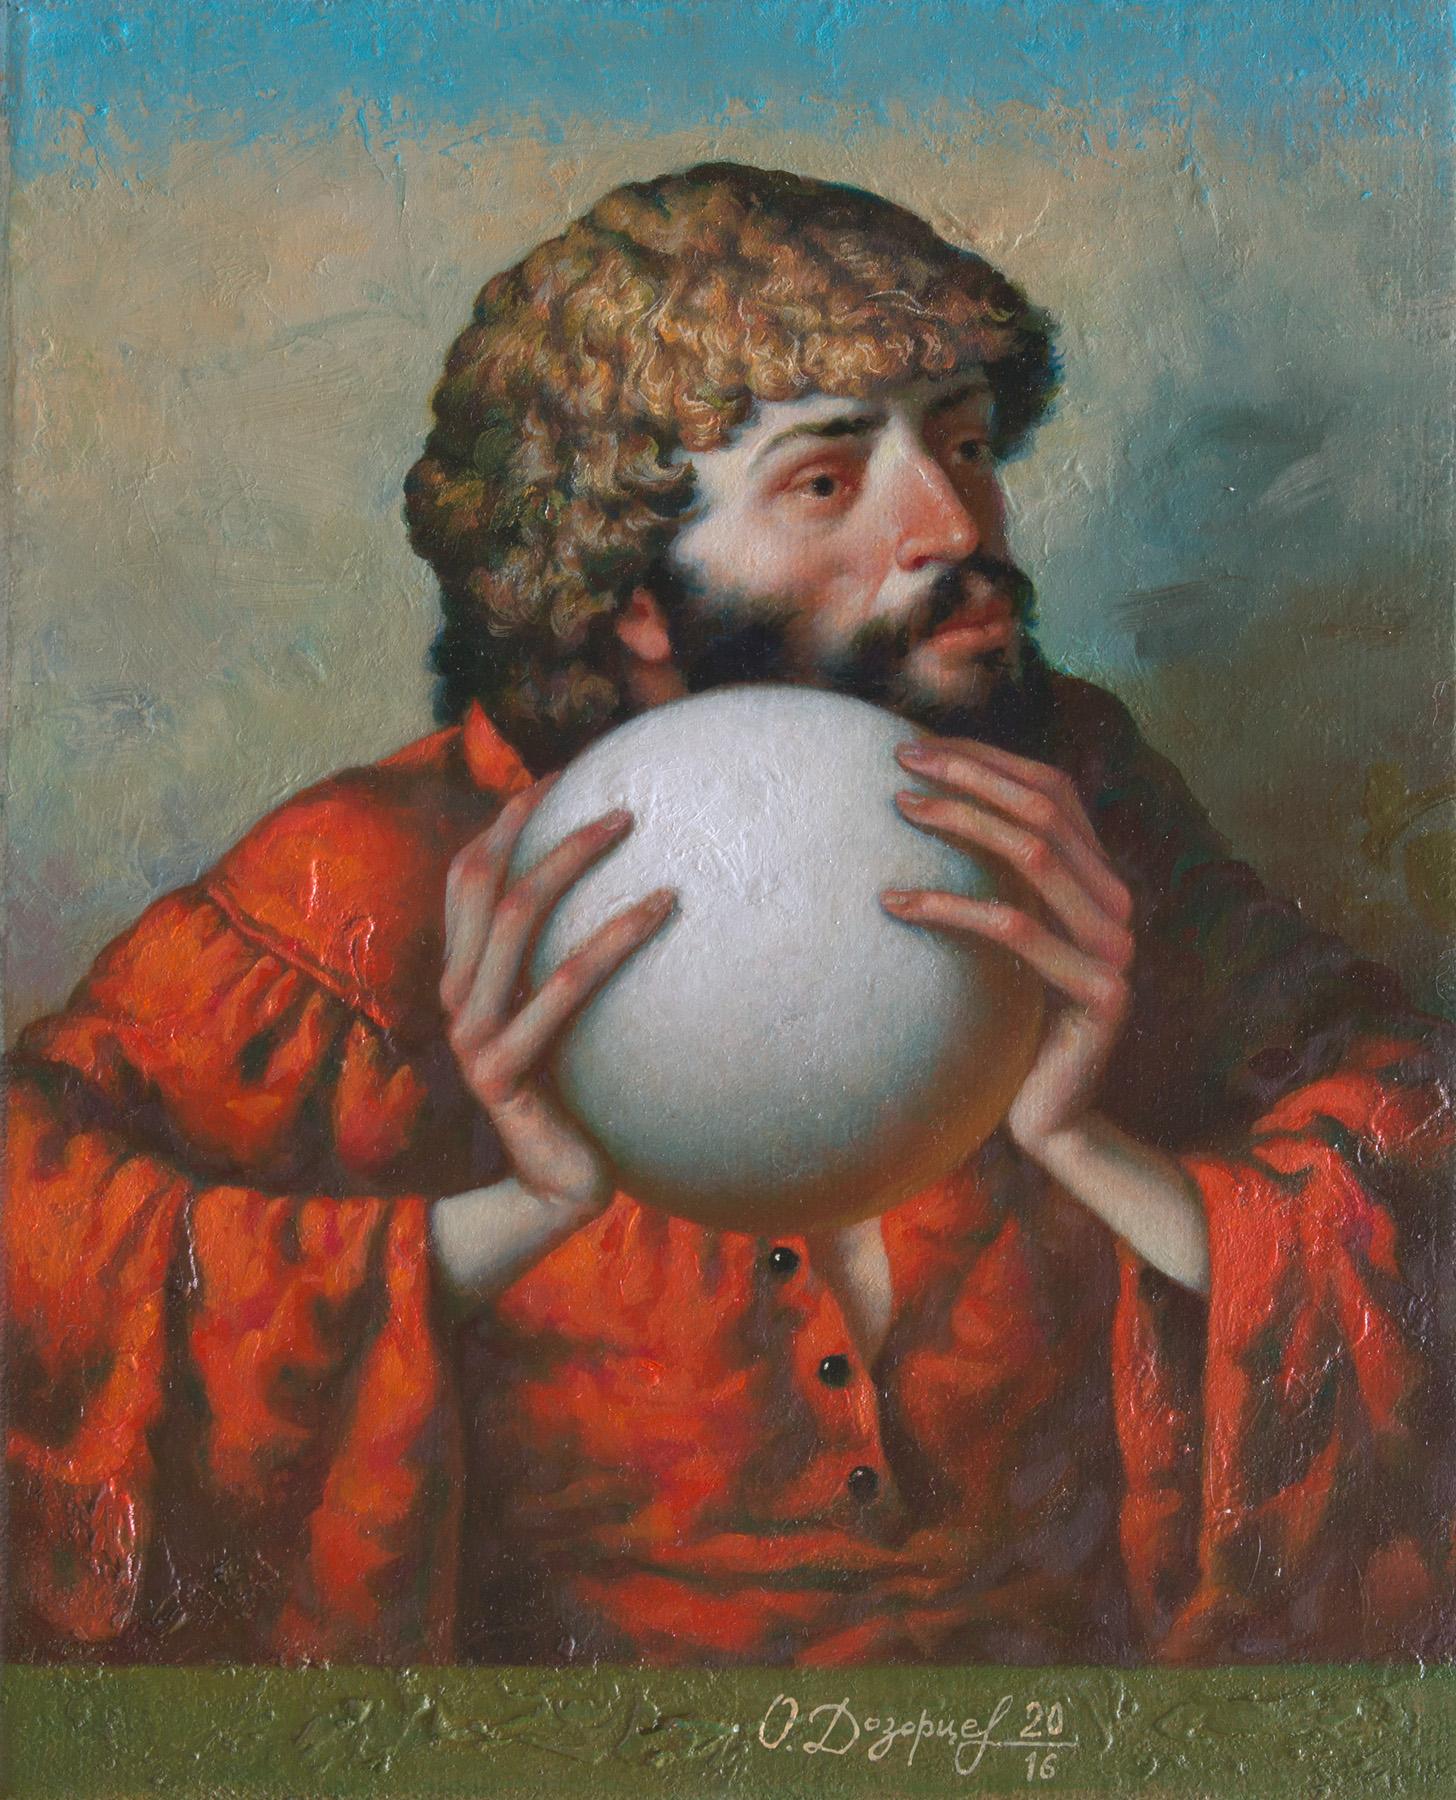 Casting. Man with the ball